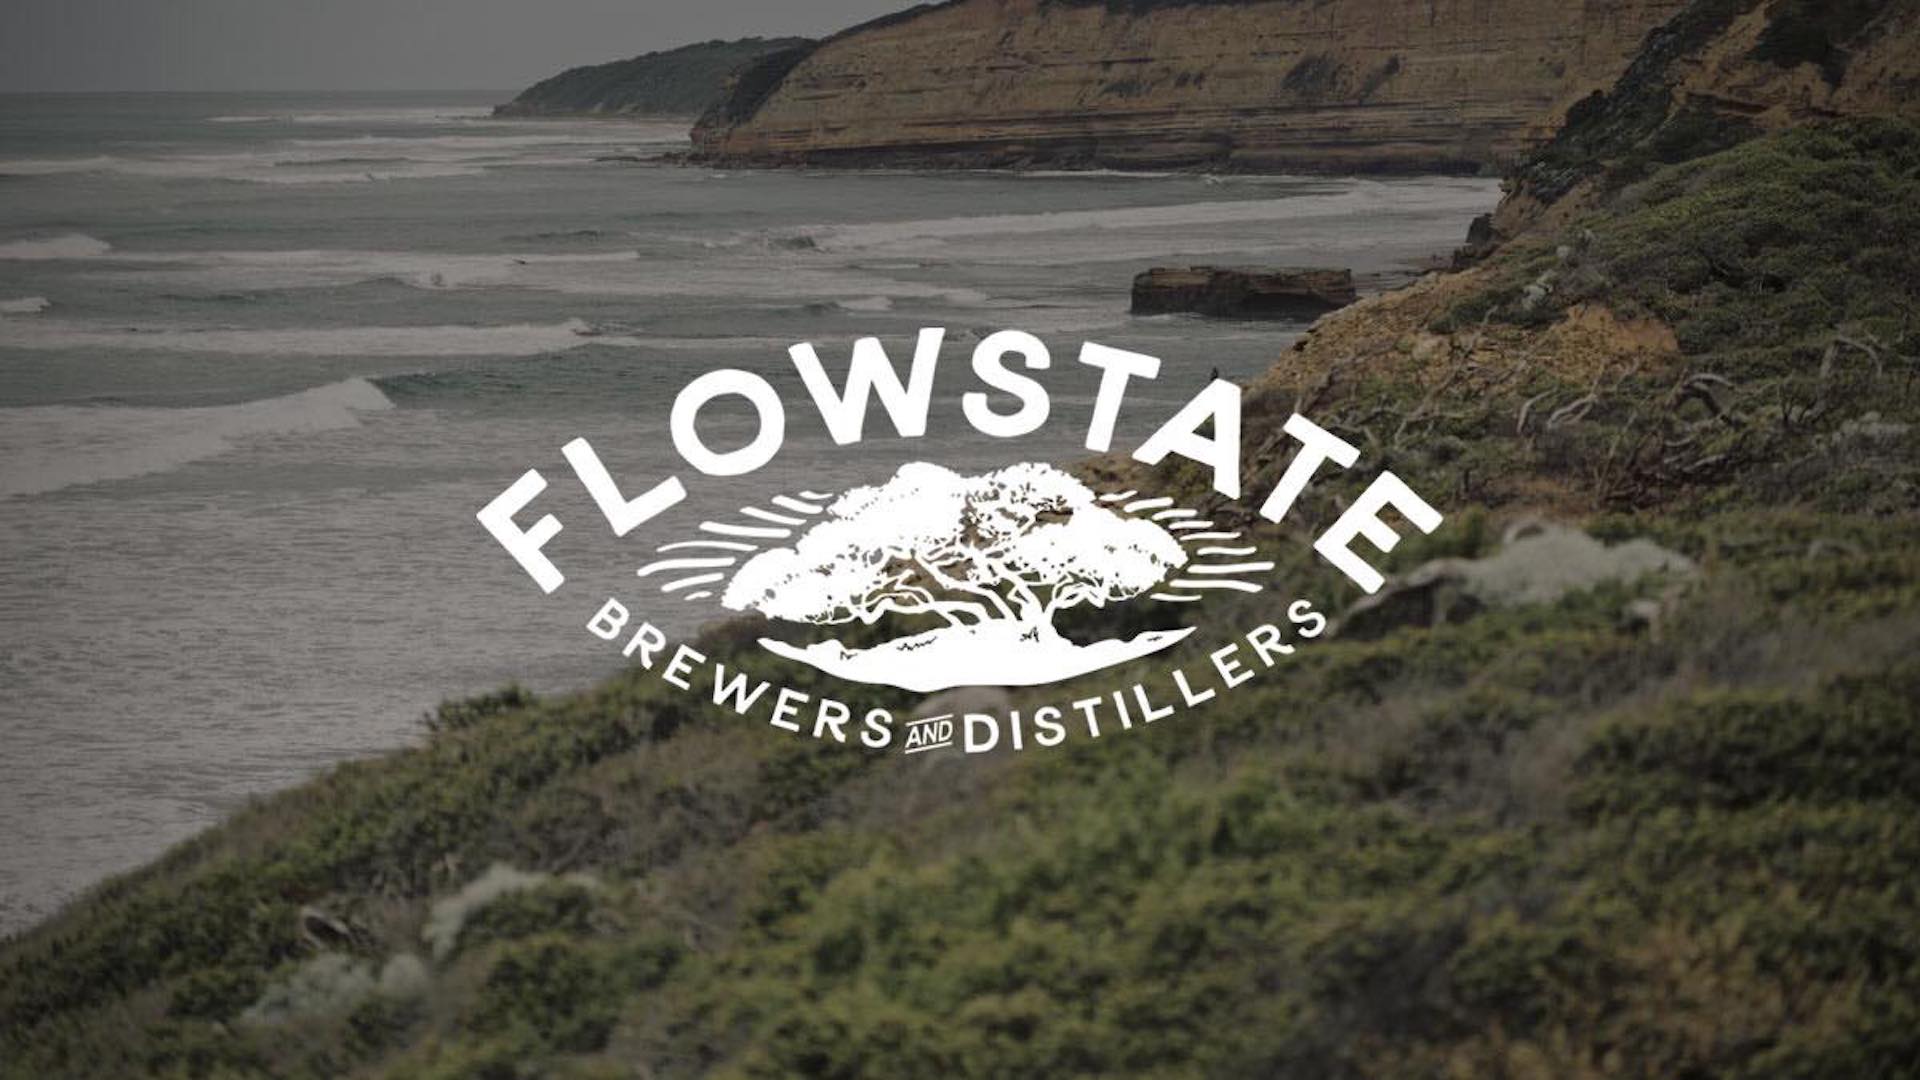 flowstate free